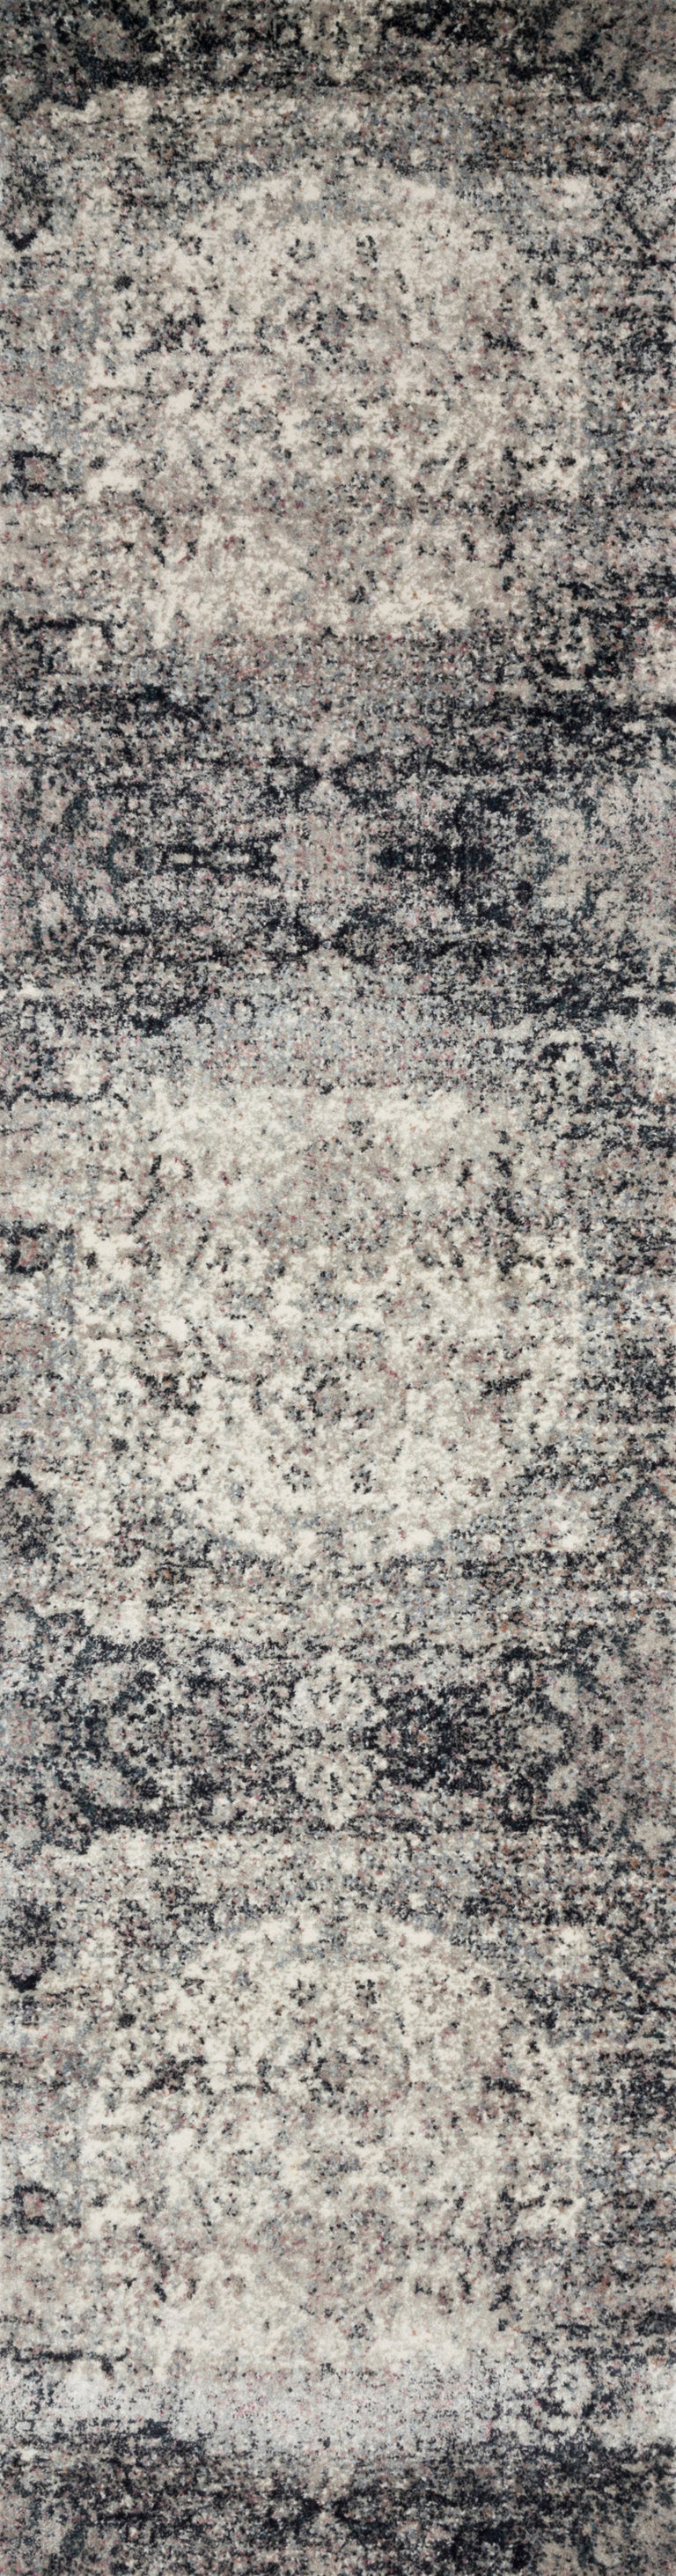 Loloi Rugs Anastasia Collection Rug in Ink, Ivory - 9'6" x 13'